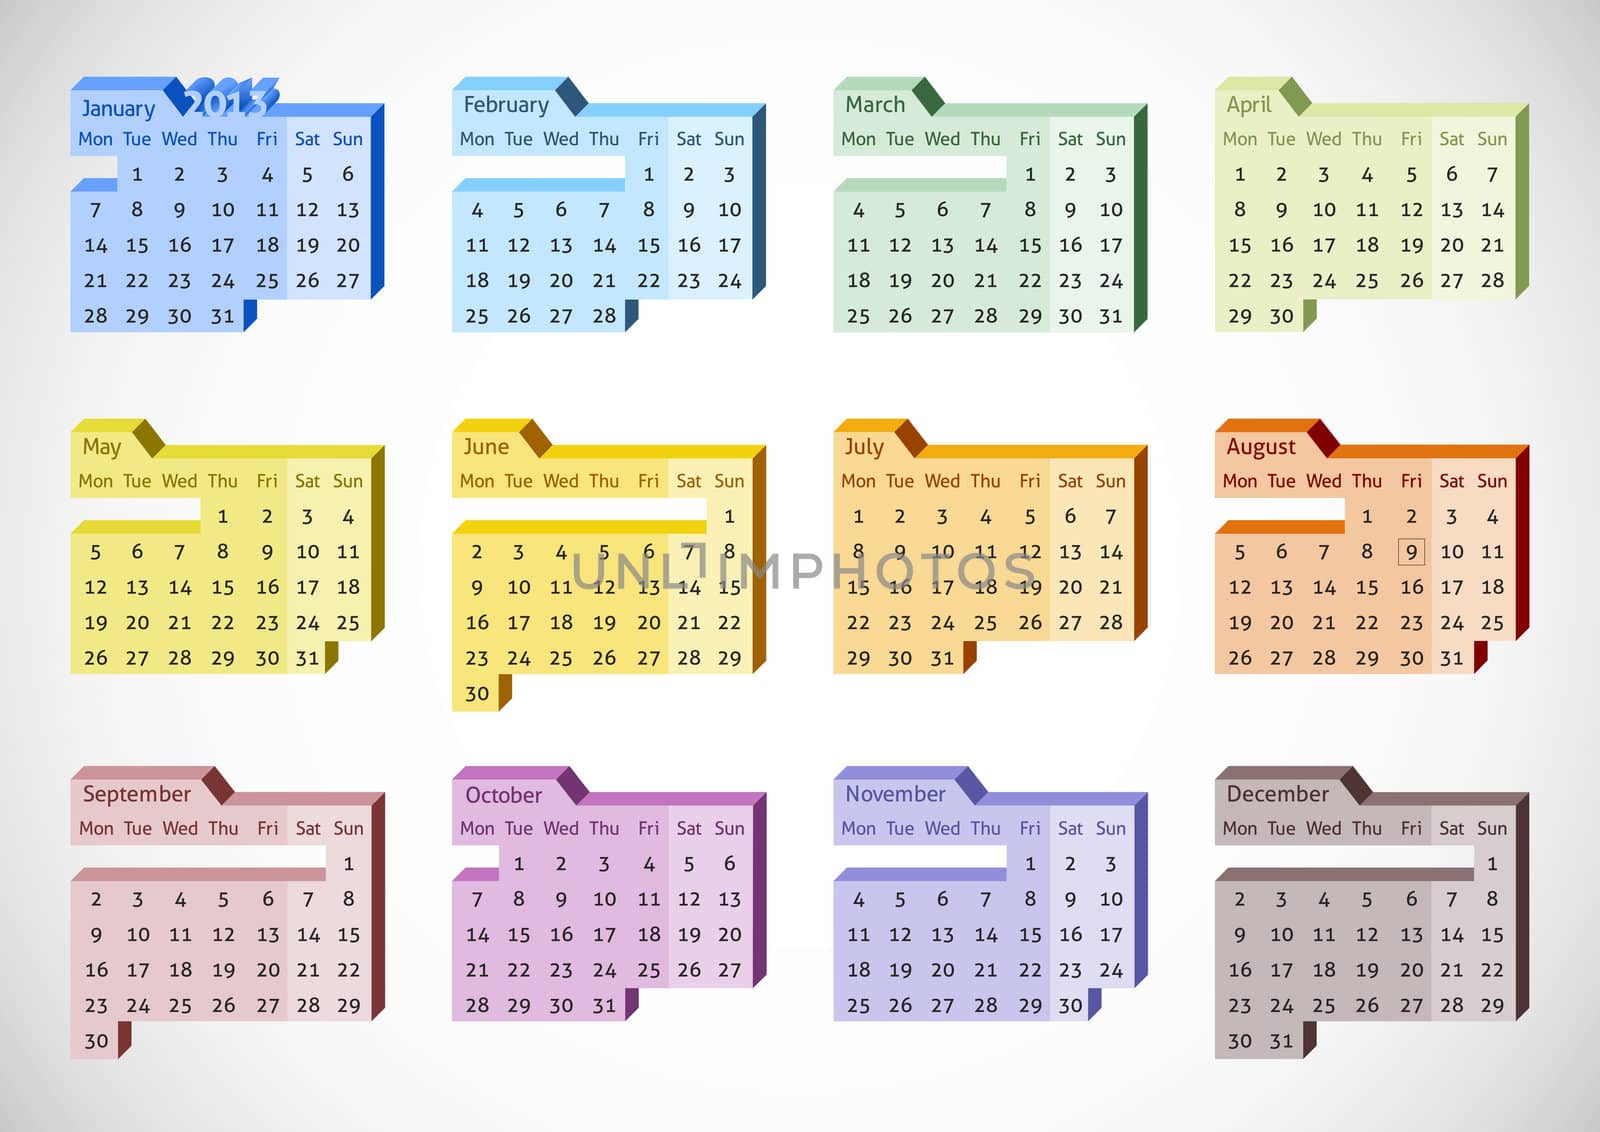 2013 Perspective Calendar by bmelo